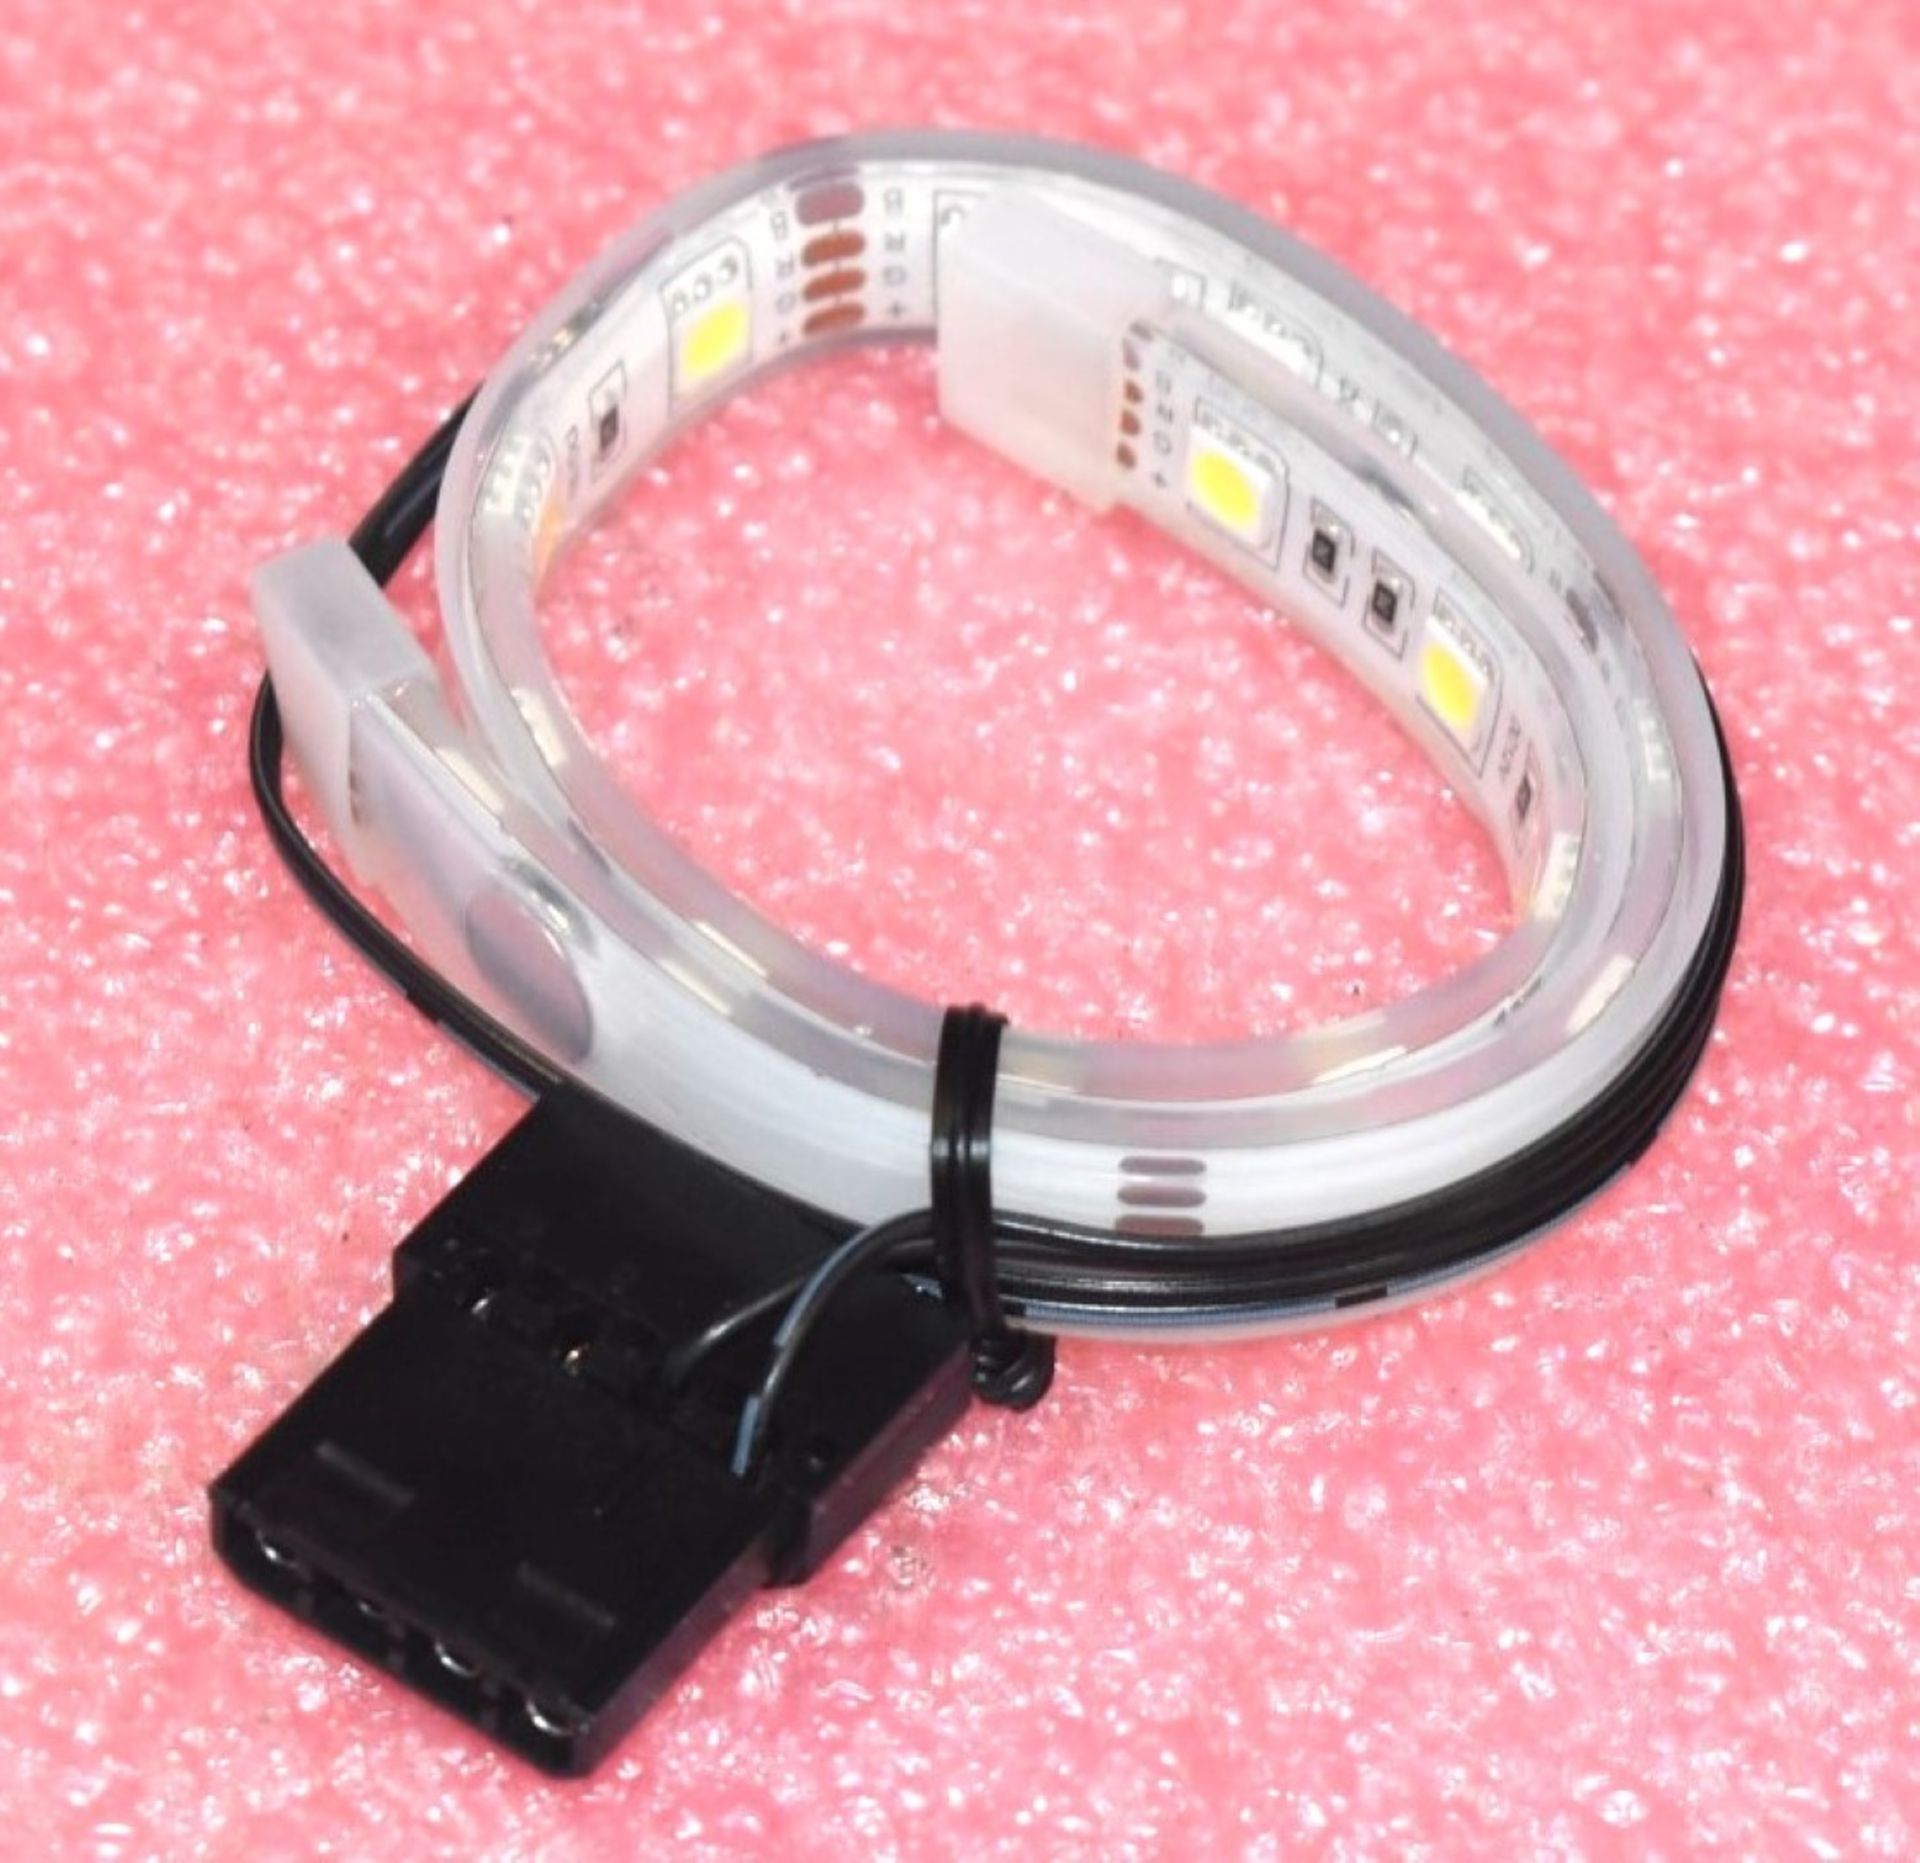 100 x PC Case Illumination 12 Inch LED Strips With Molex Connectors - New Sealed Packets - Image 3 of 5